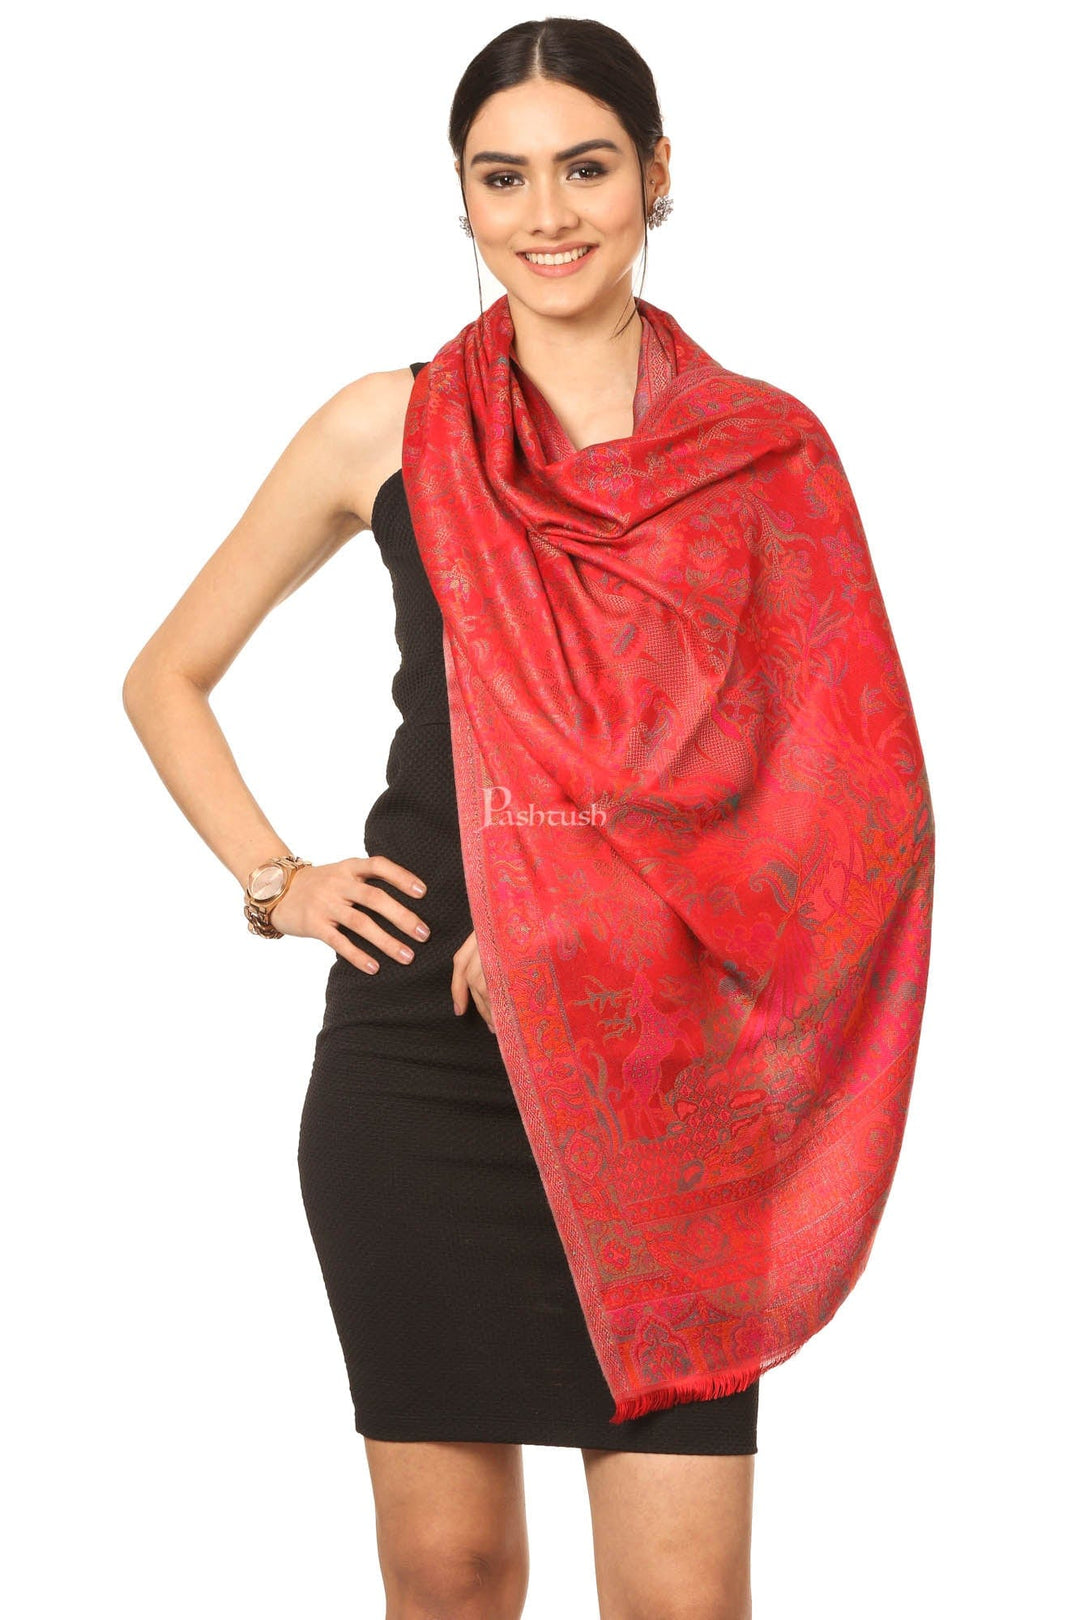 Pashtush India Womens Stoles and Scarves Scarf Pashtush Women'S Soft Bamboo Scarf, Casual, Stole, Wrap - Red